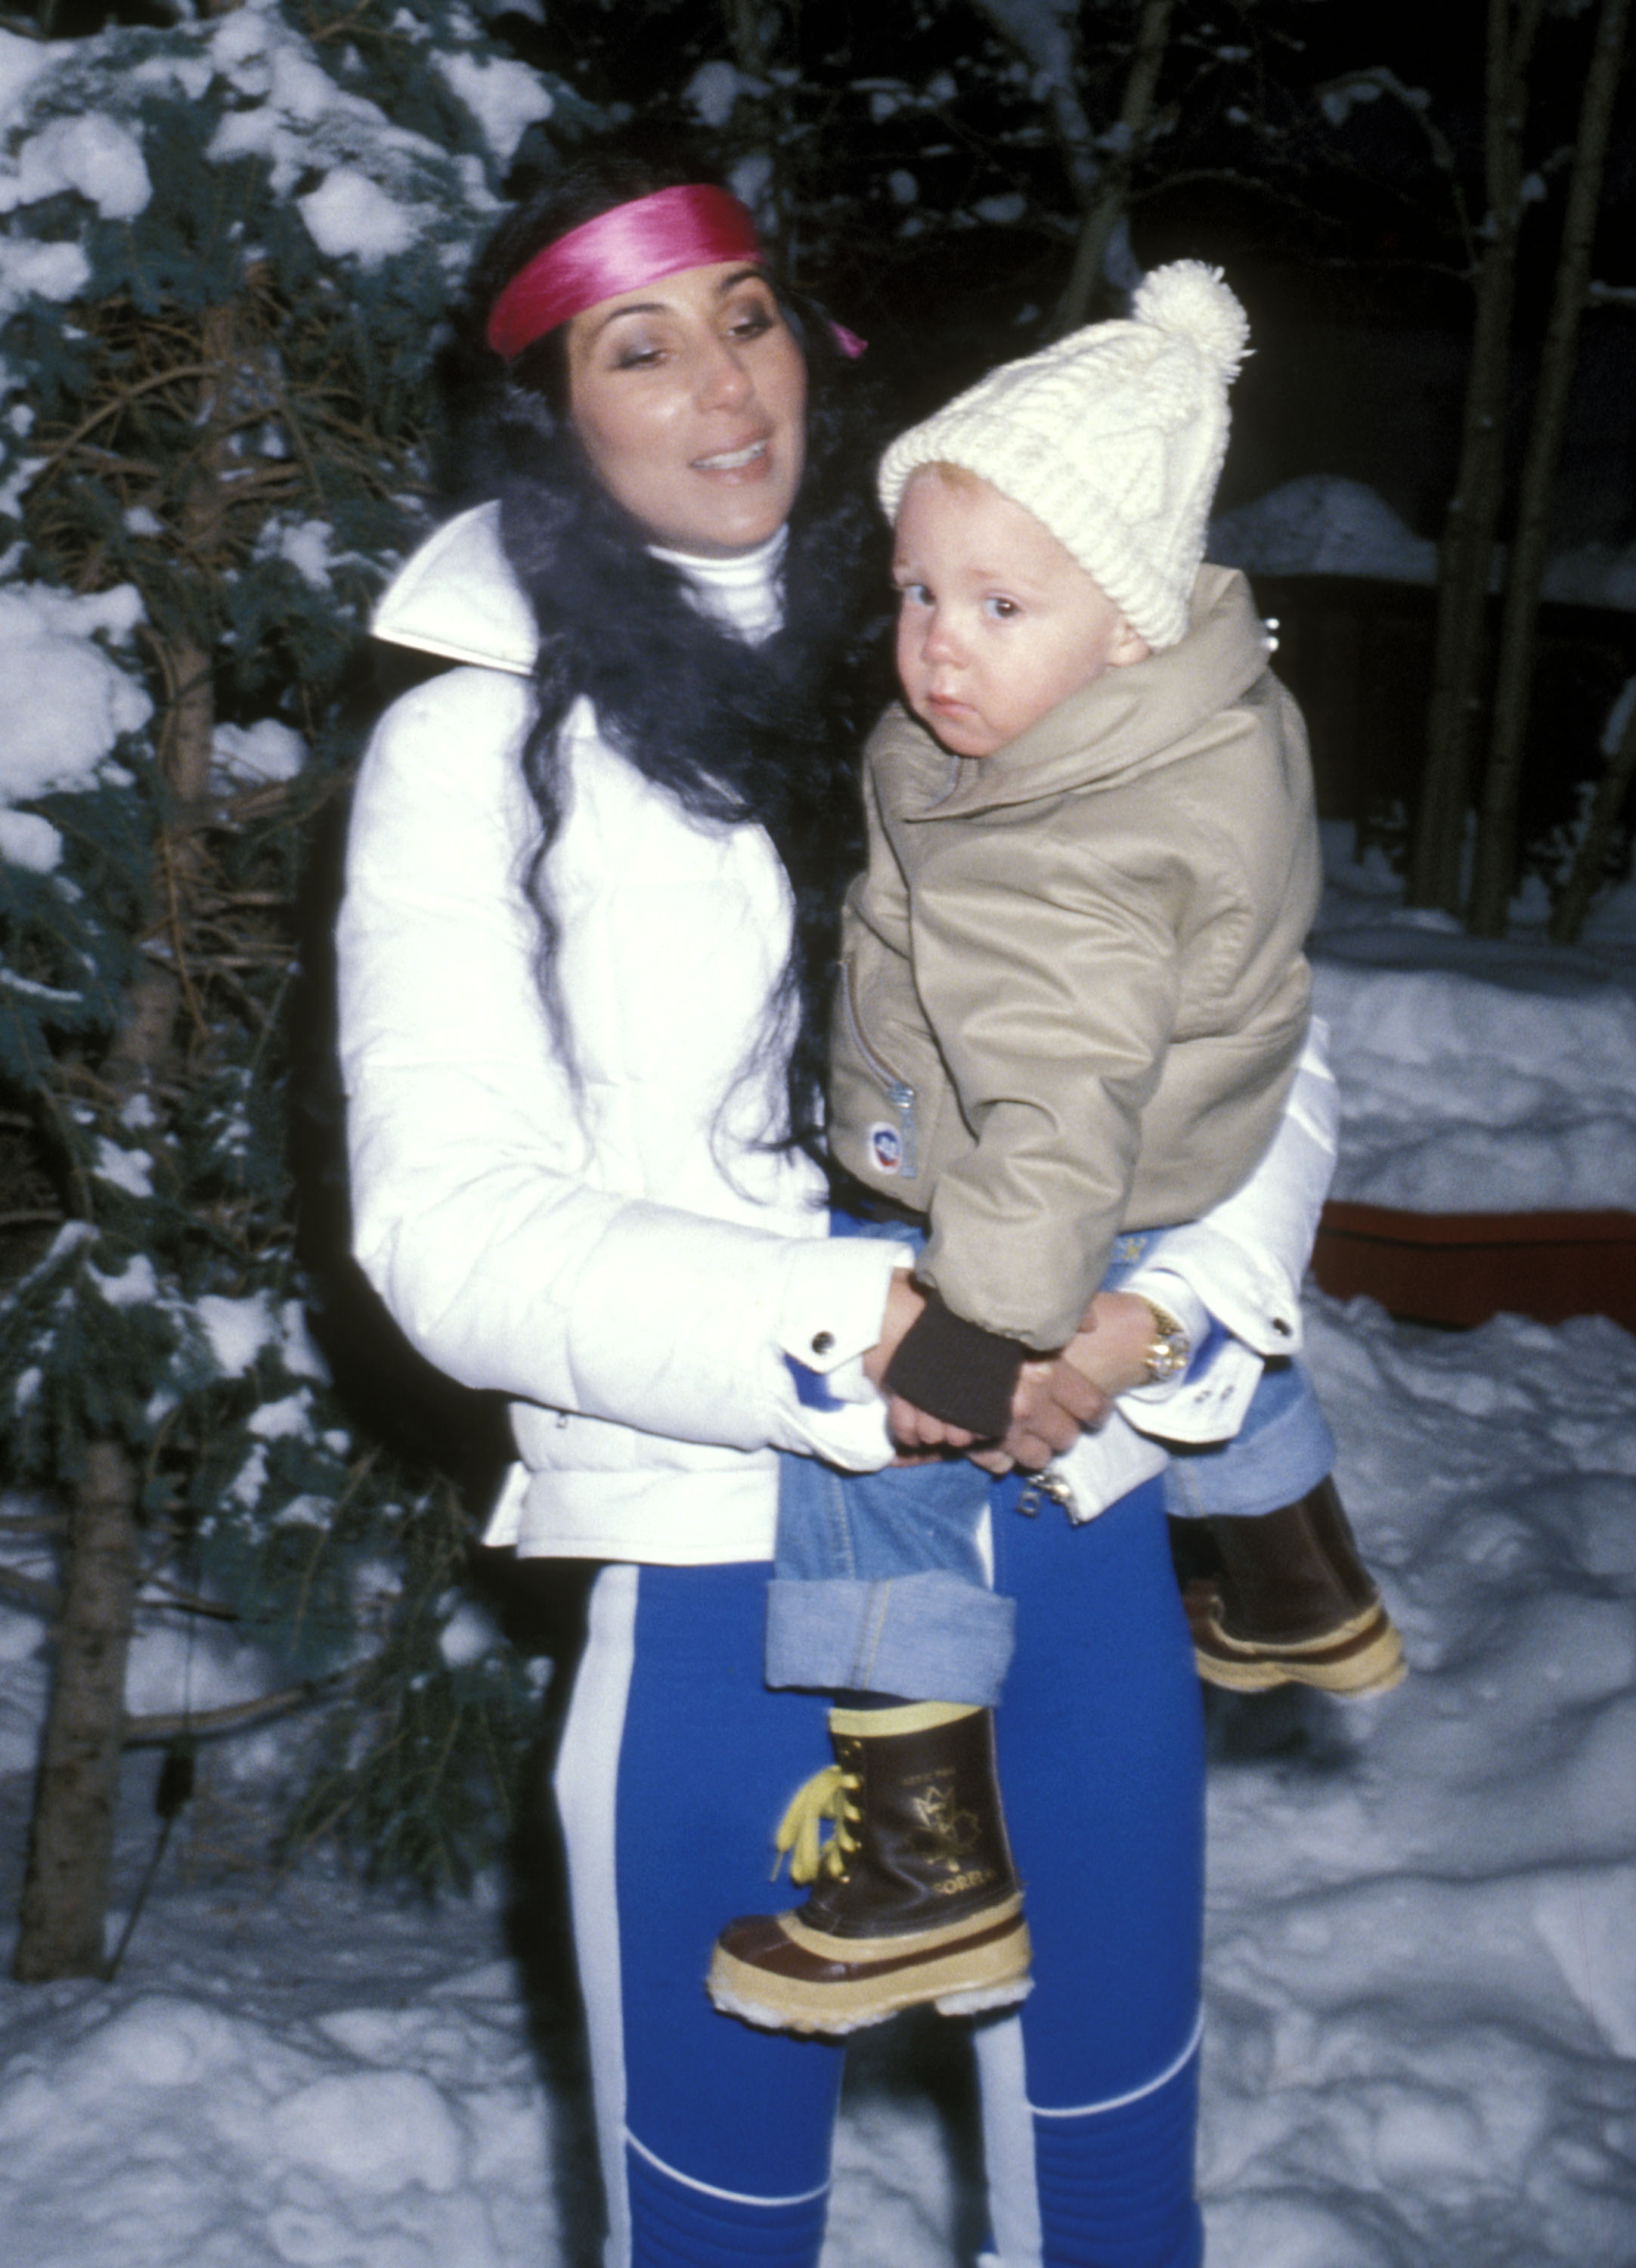 Cher and son Elijah Blue Allman on December 21, 1977 in Aspen, Colorado | Source: Getty Images